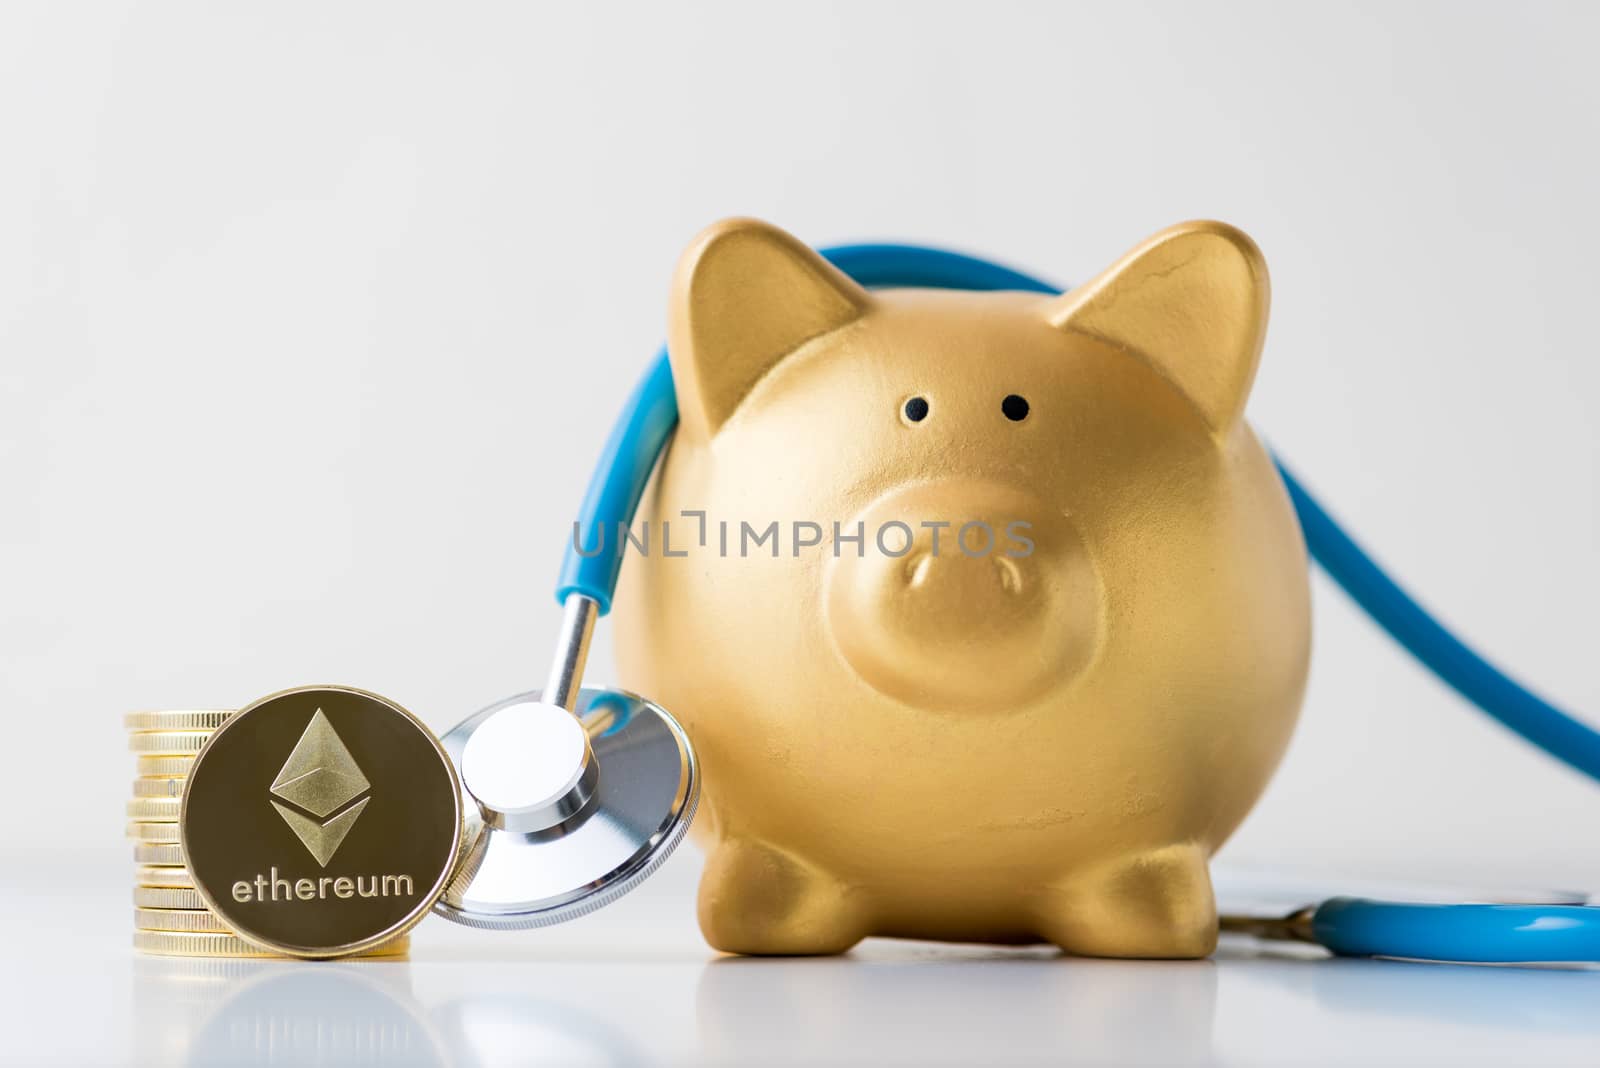 piggy bank with stethoscope and cryptocurrency  ethereum coins on white background.